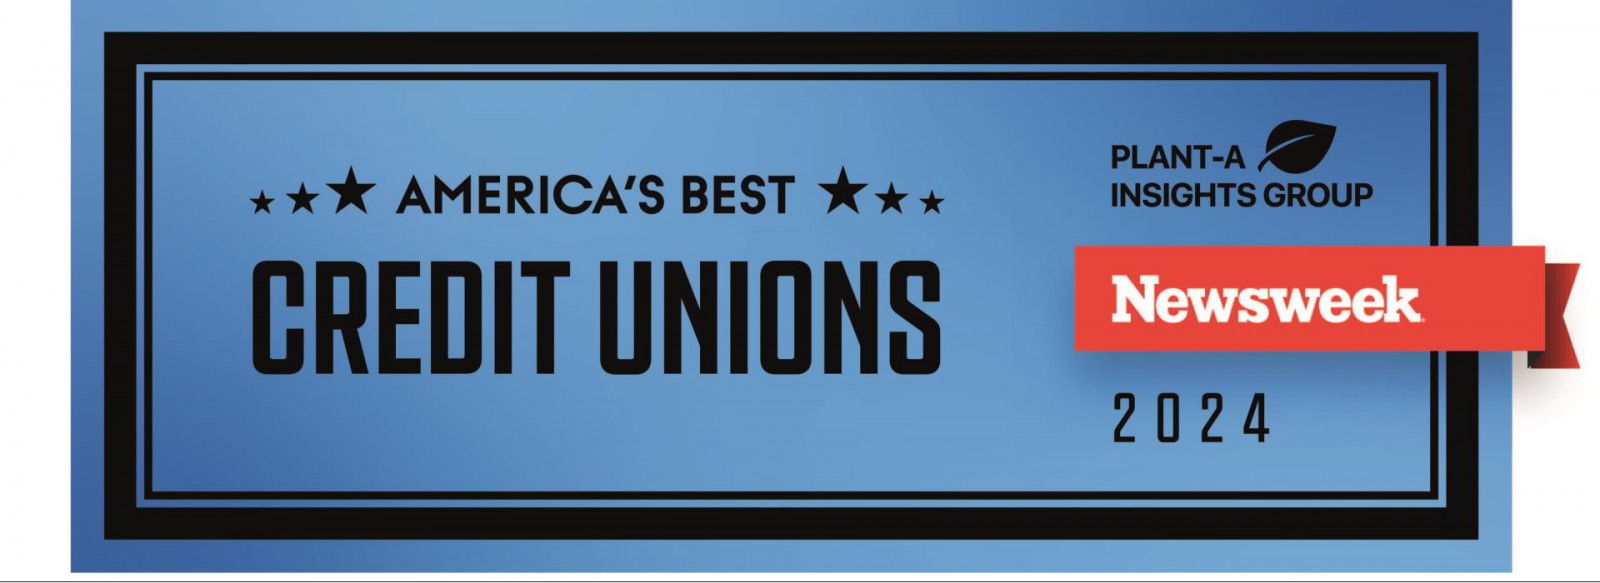 America's Best Credit Unions 2024: Plant-A Insights Group and Newsweek